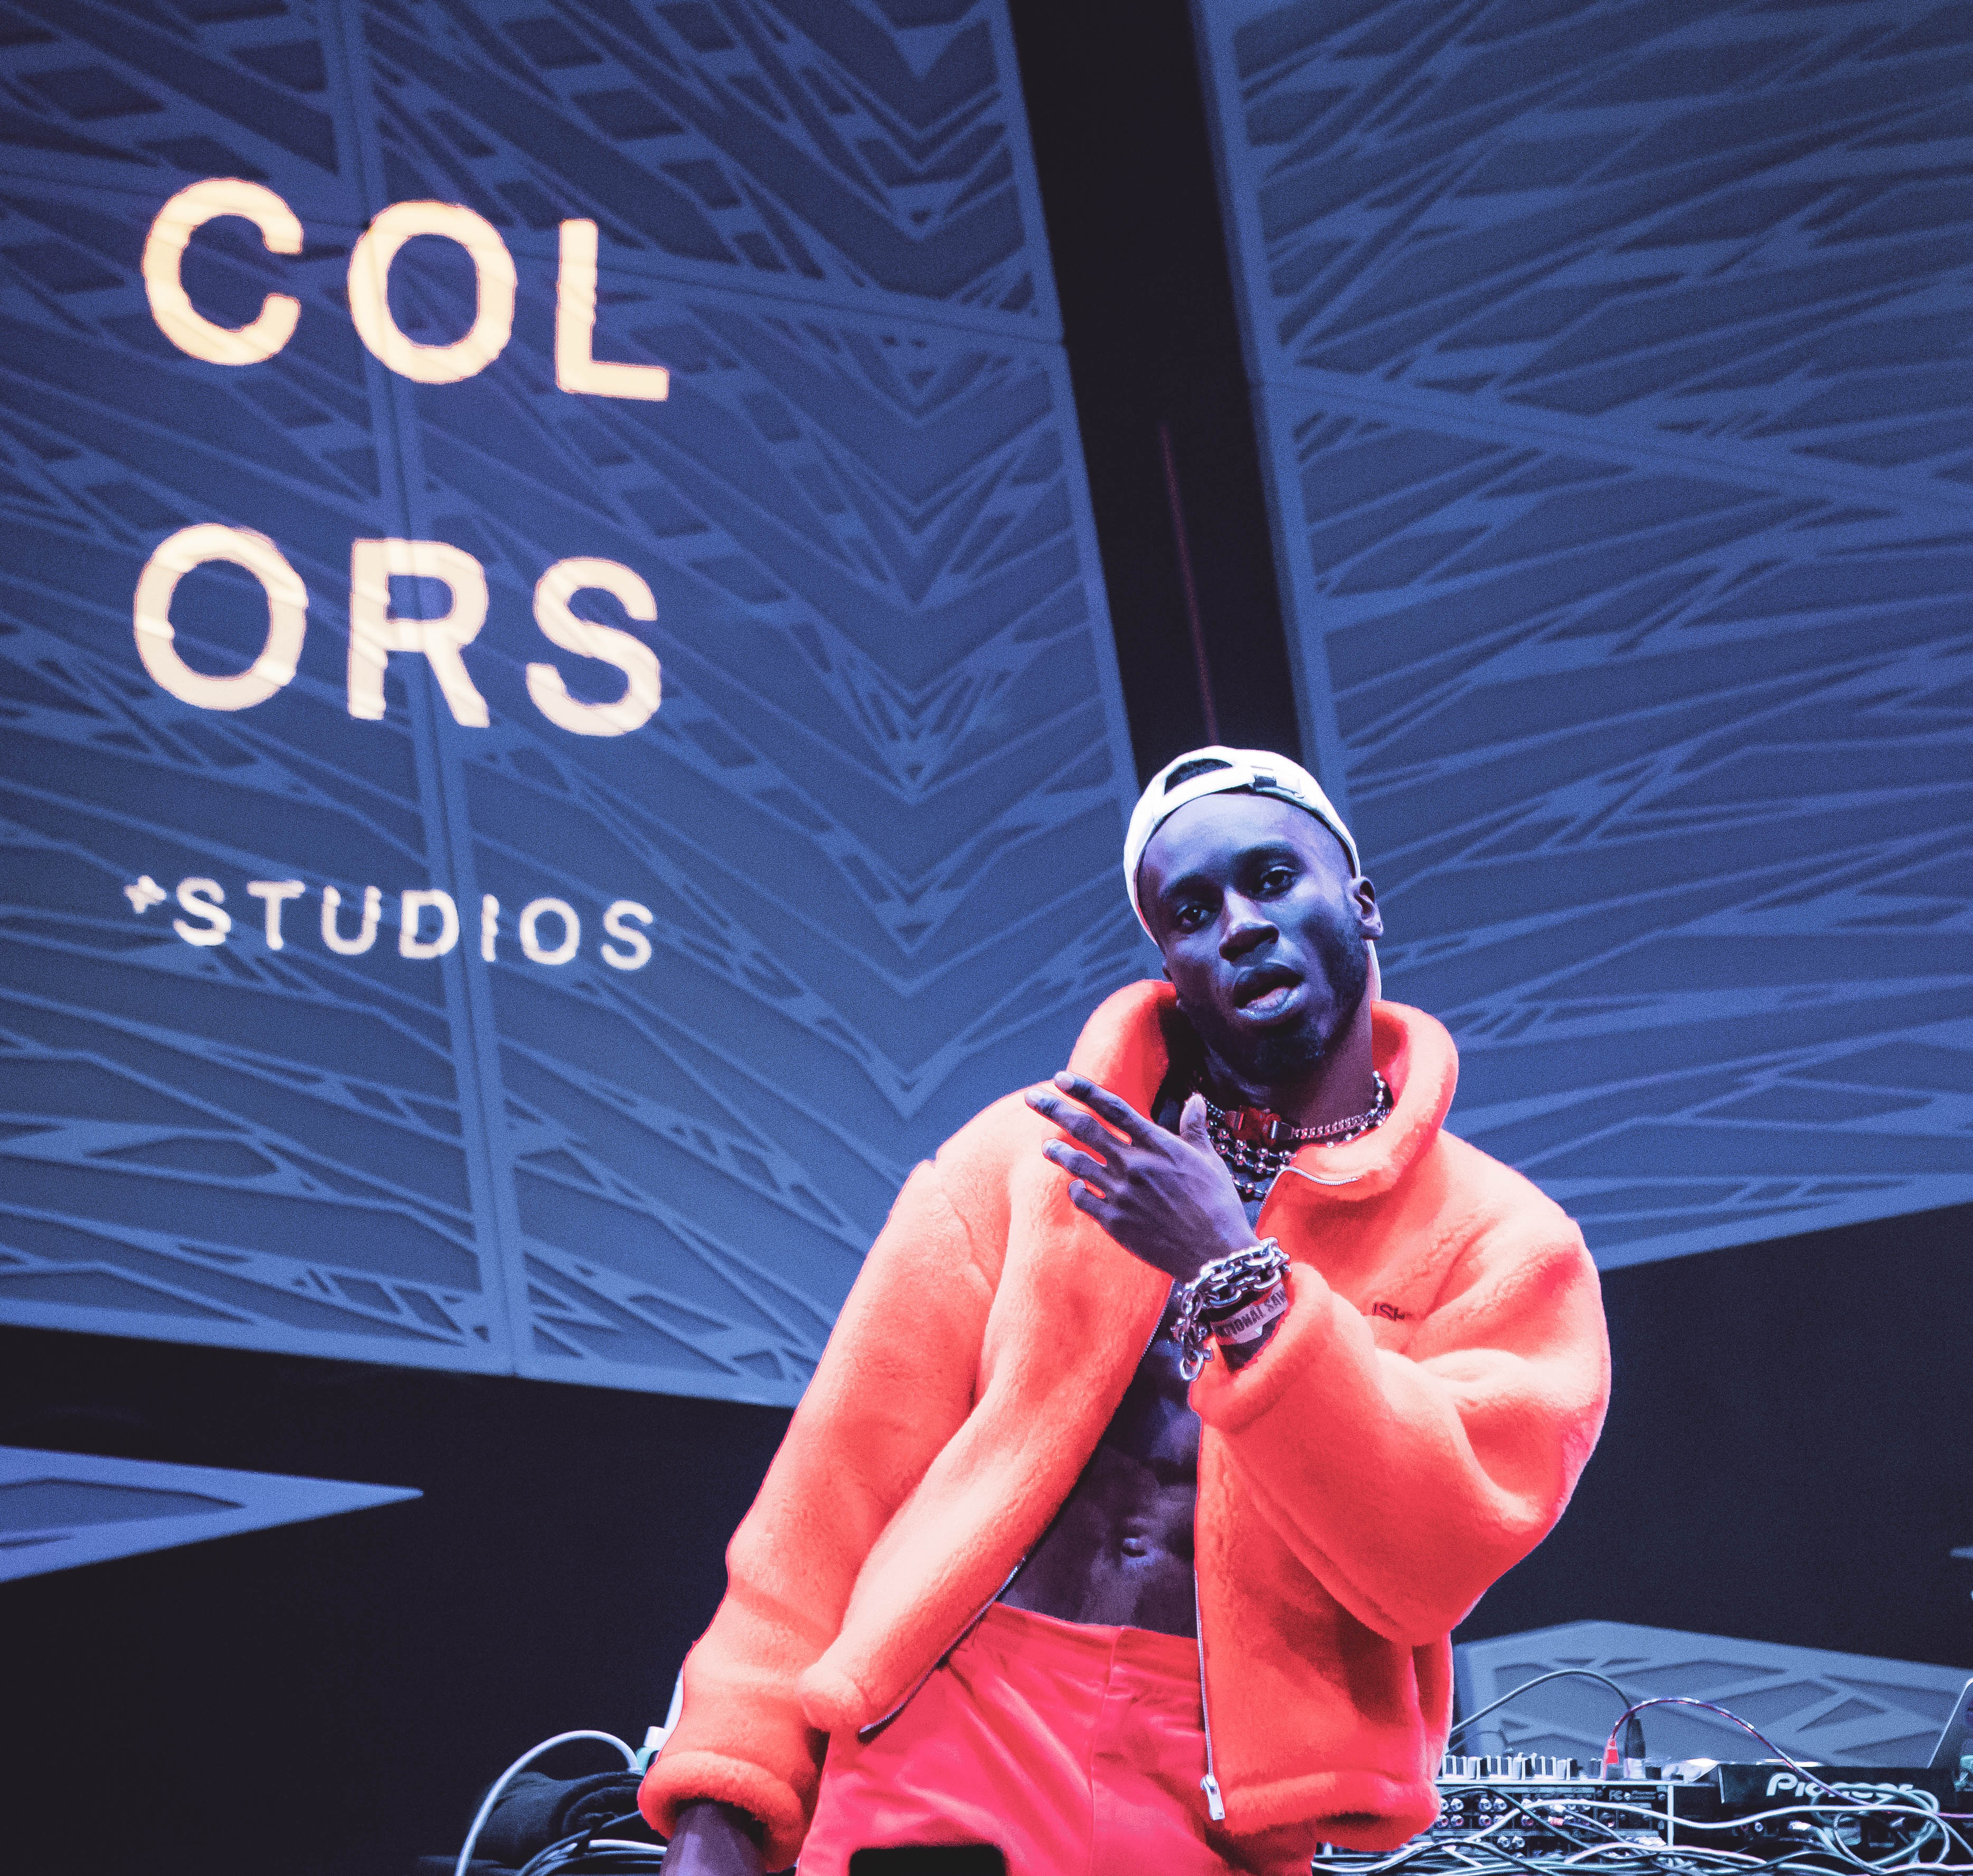 The rapper Kojey Radical at a COLORS Studios show at National Sawdust in Brooklyn in November.